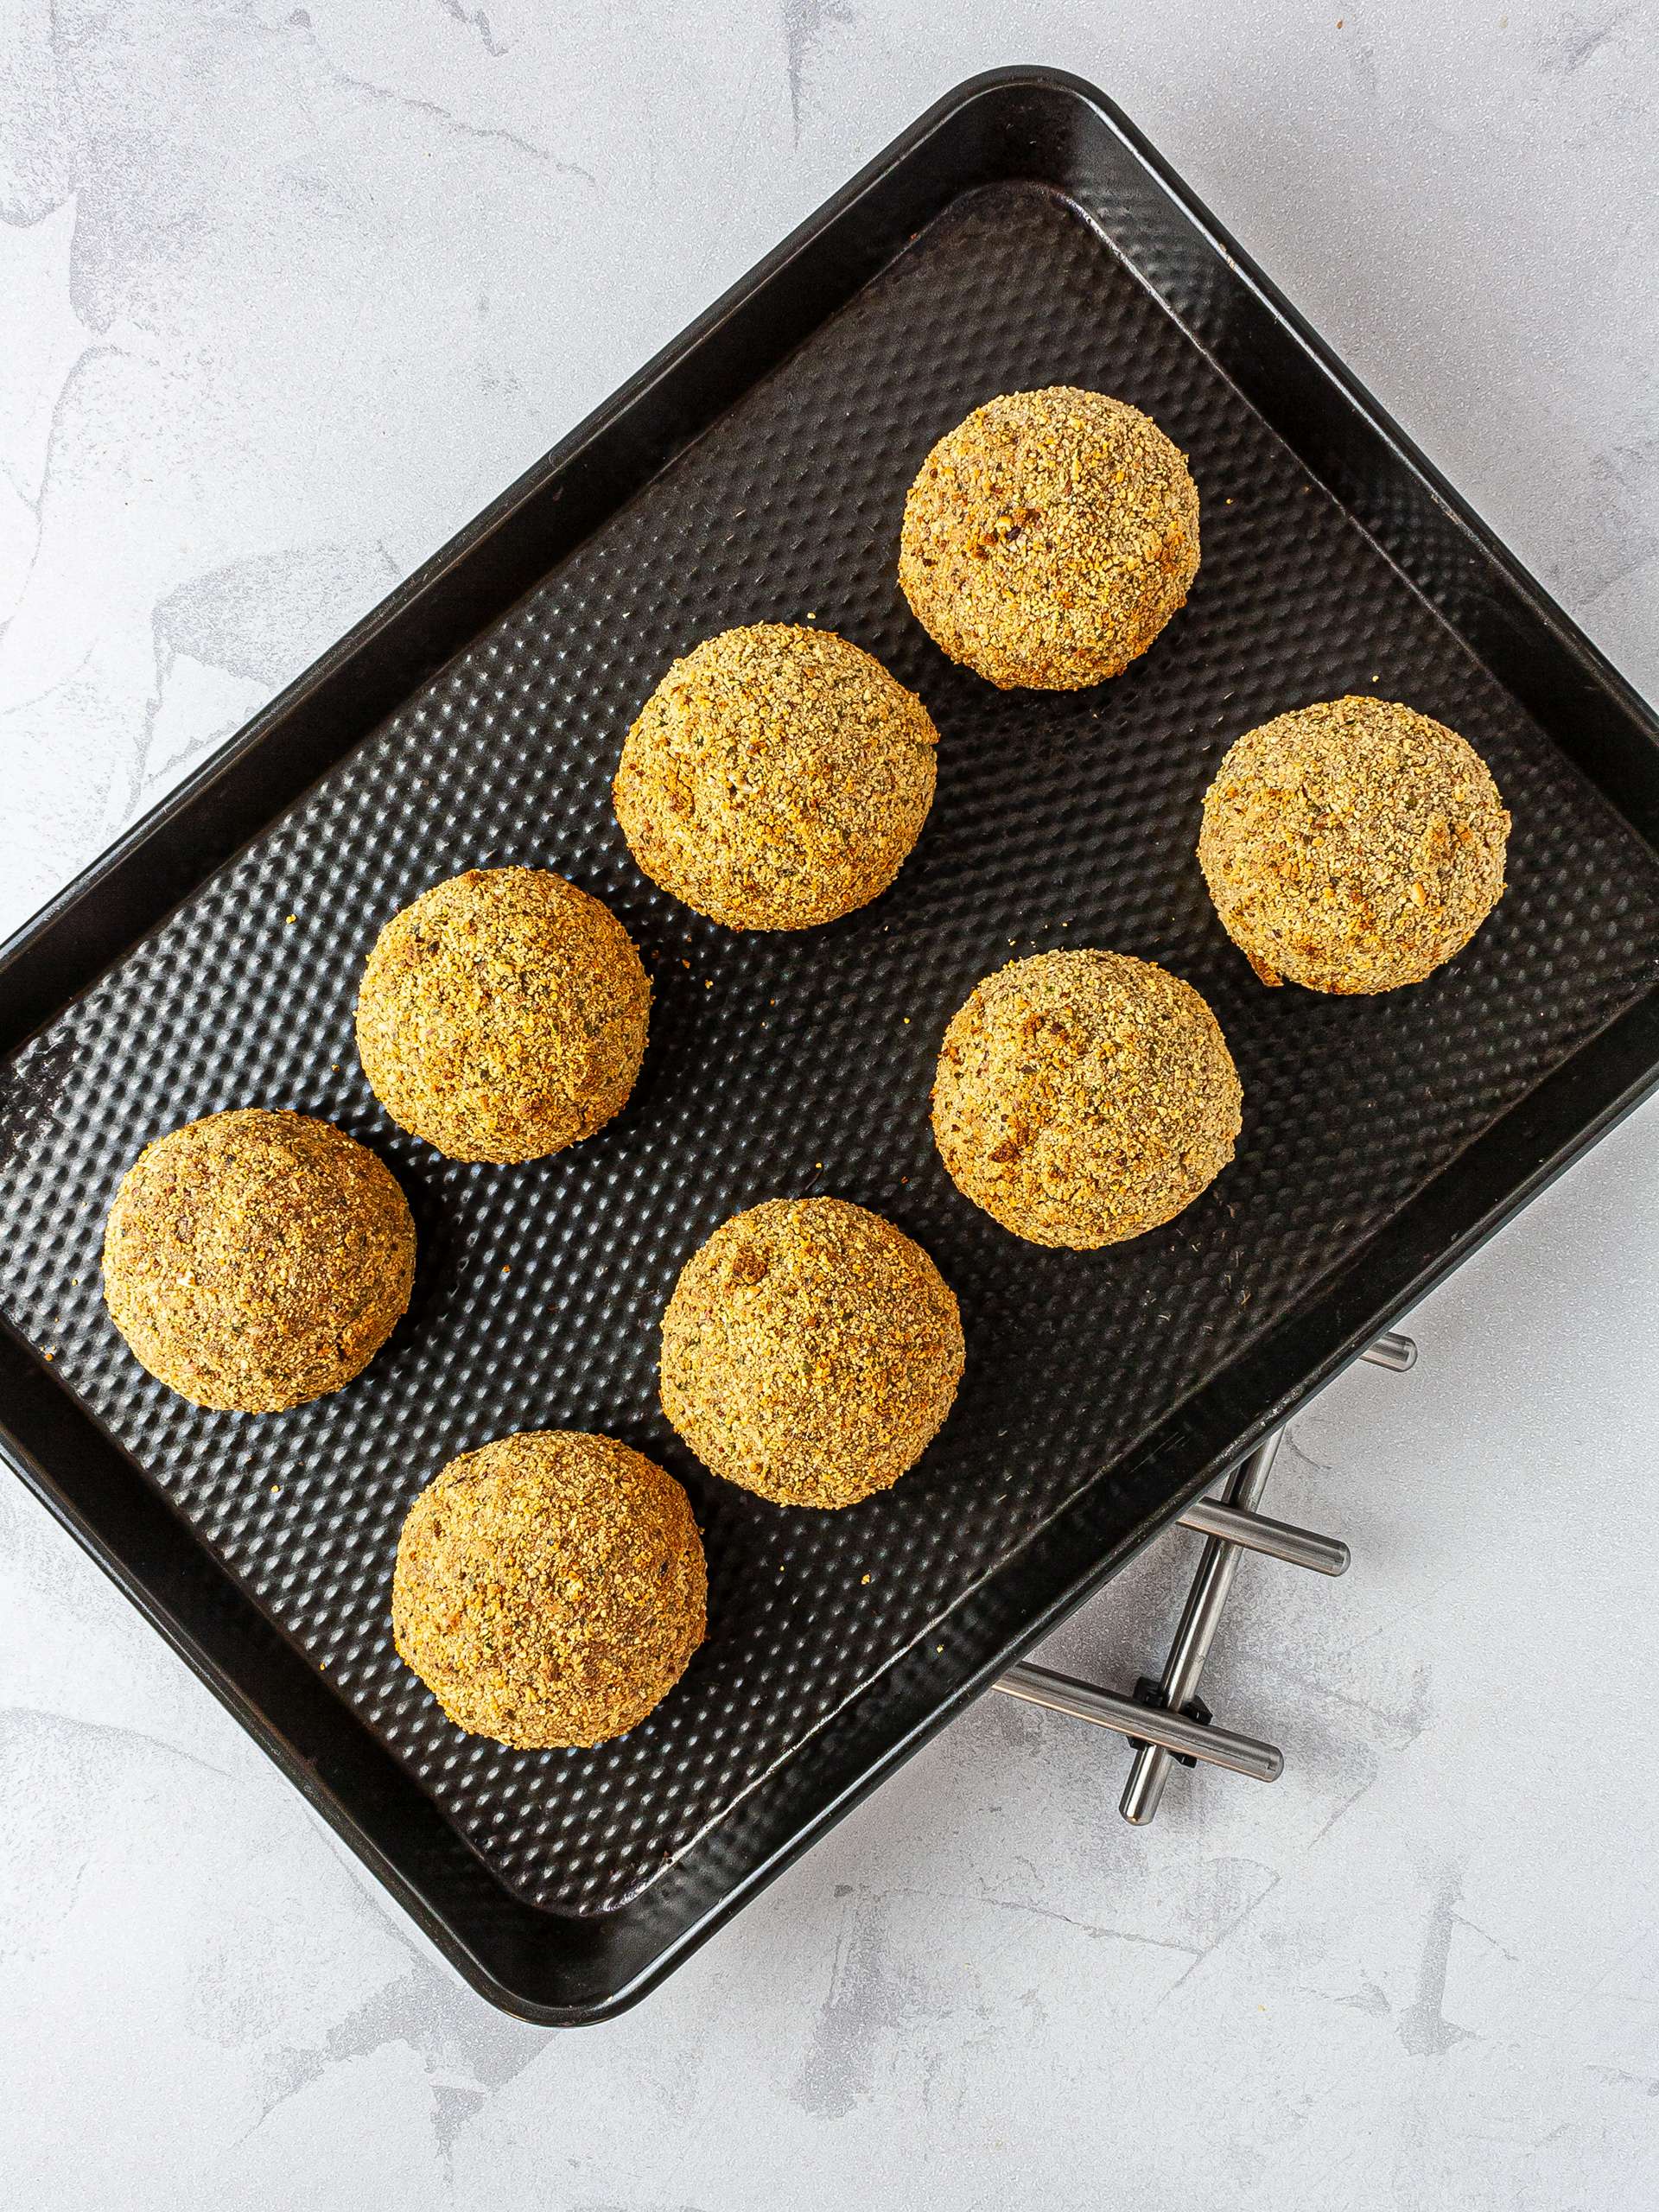 Arancini rice balls baked in the oven.